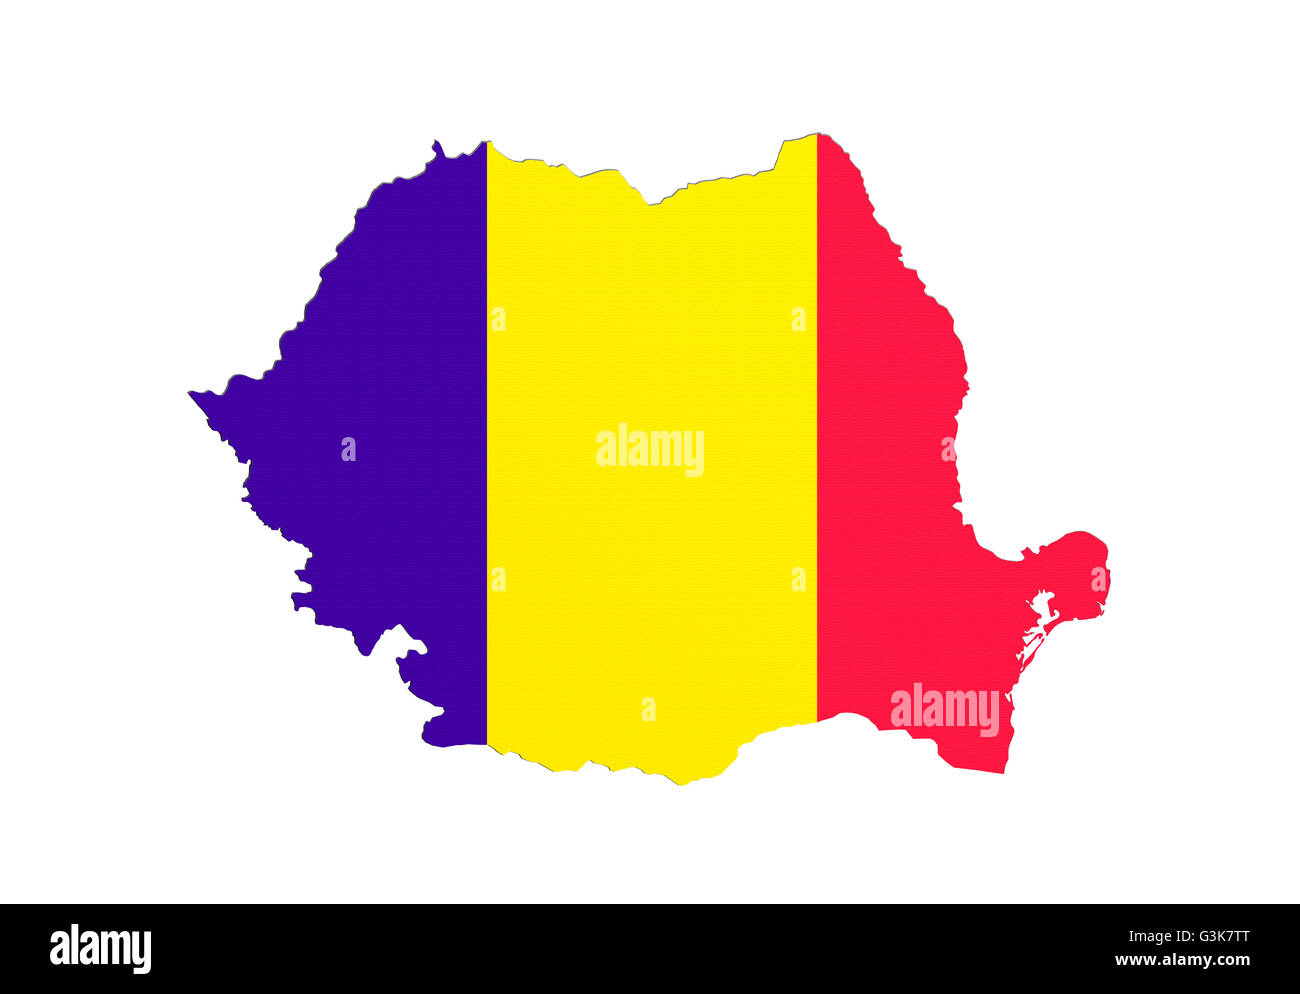 3d rendering of Romania map and flag on white background. Stock Photo